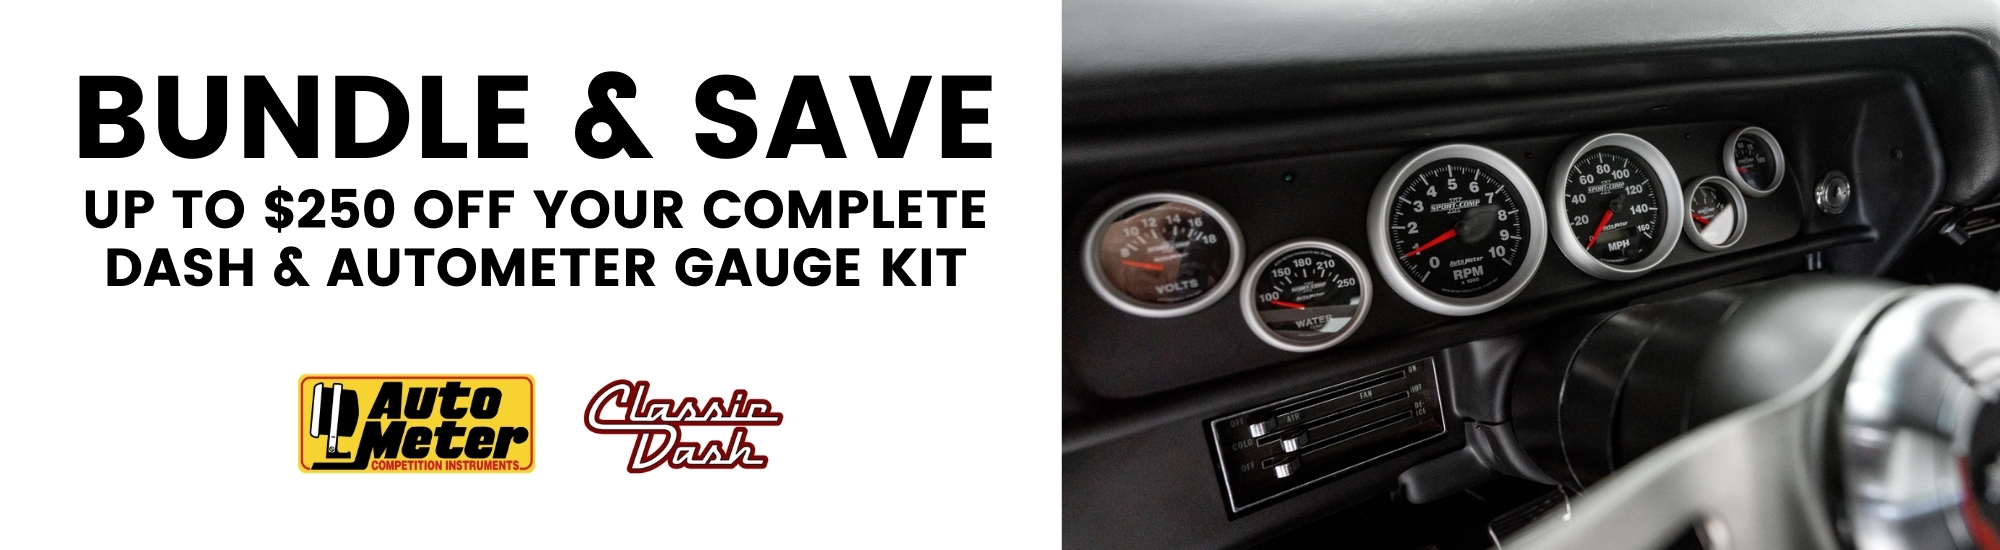 Bundle and Save up to $250 Off Dash and Complete Autometer Gauge Kits